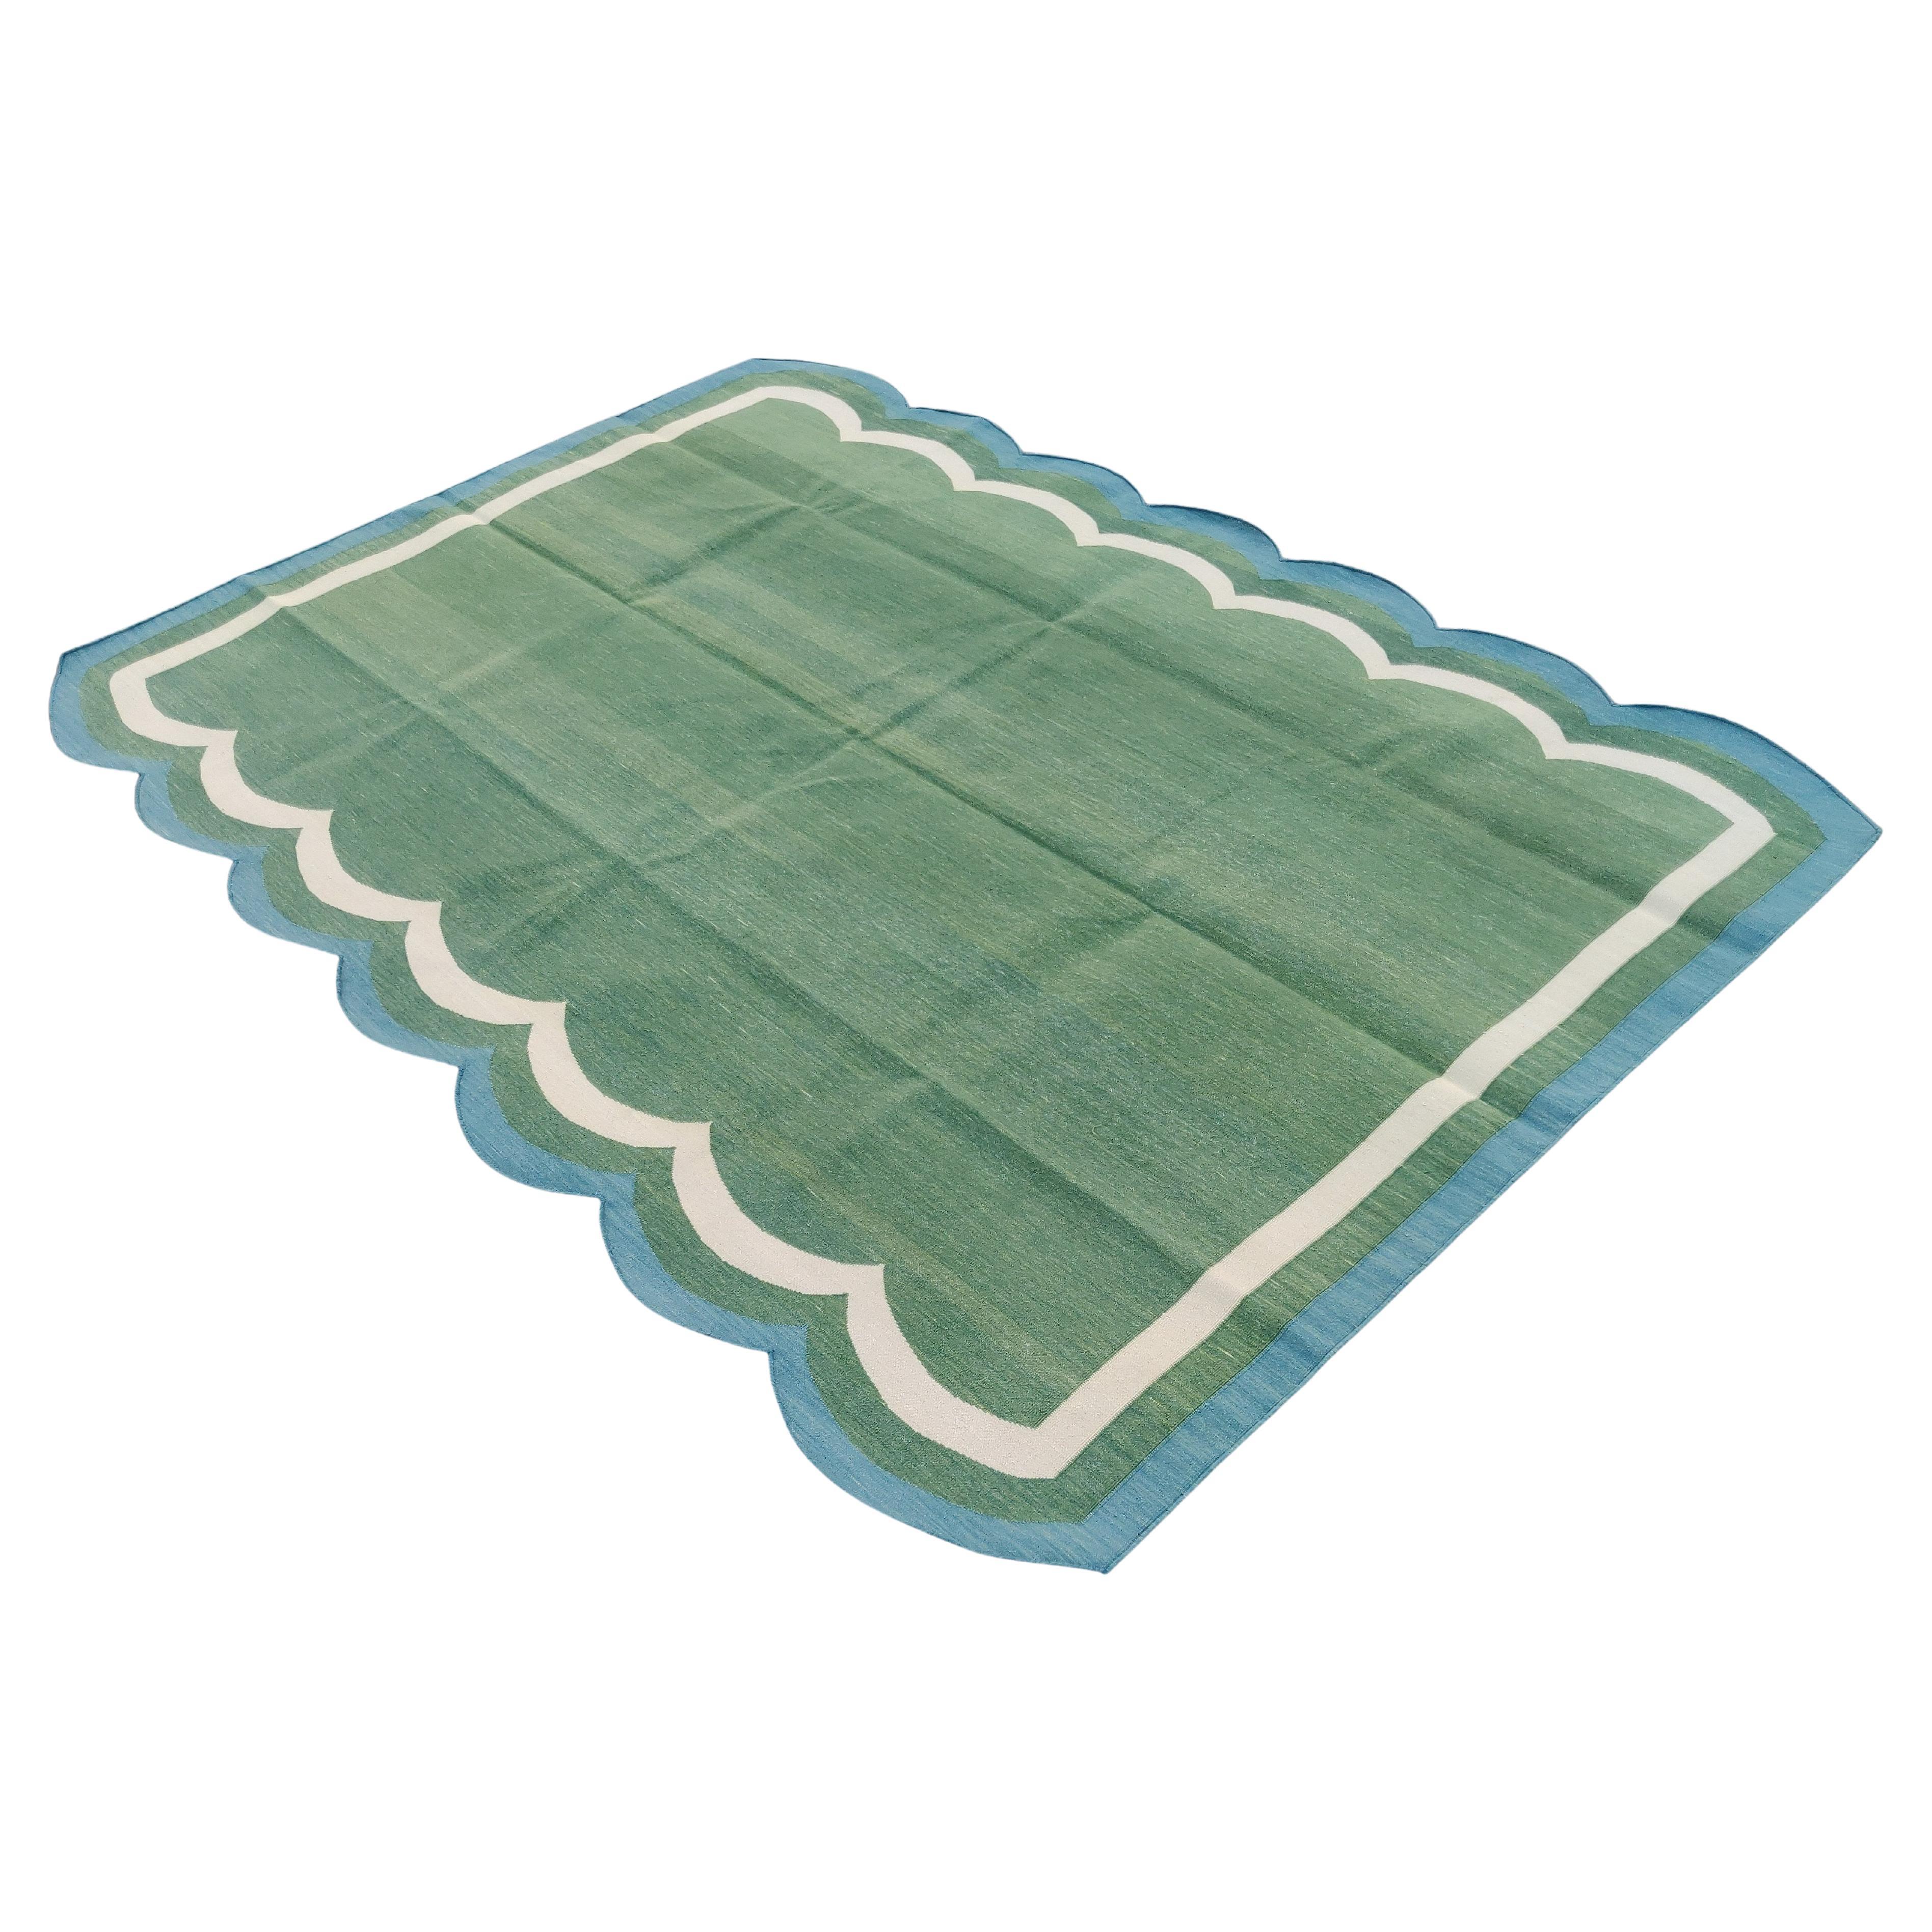 Handmade Cotton Area Flat Weave Rug, 5x7 Green And Blue Scallop Striped Dhurrie For Sale